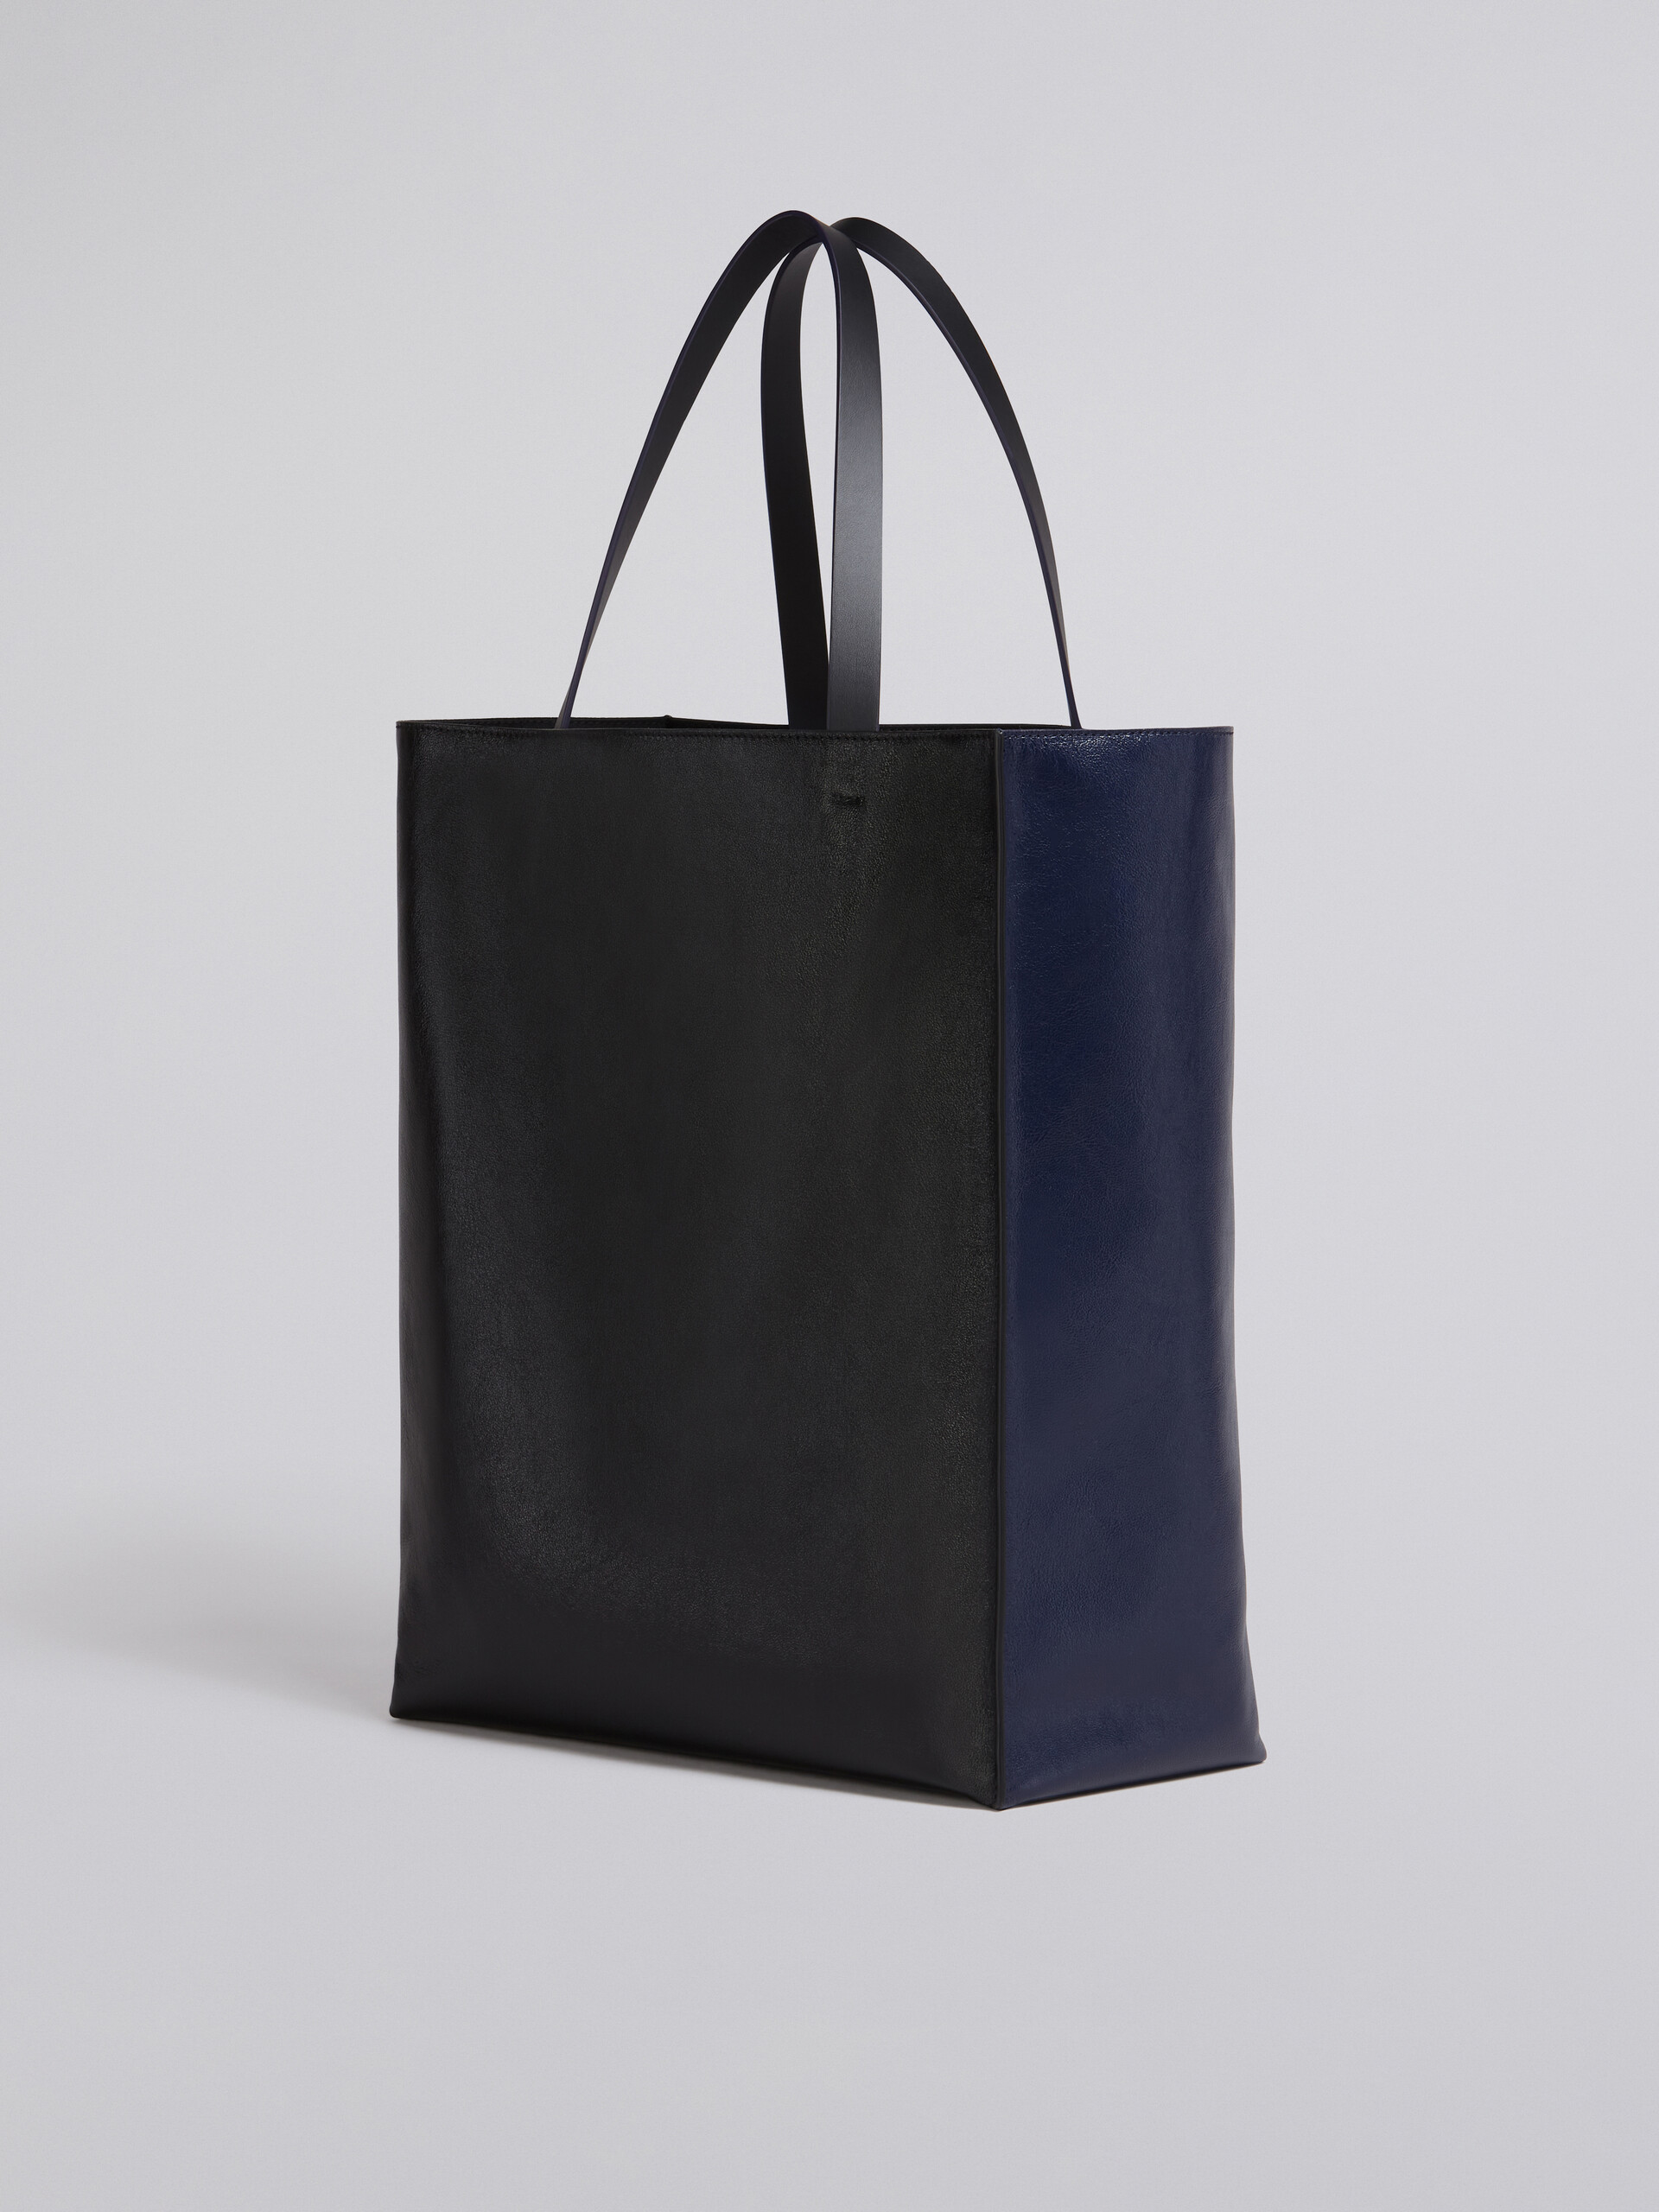 MUSEO SOFT large bag in blue and black shiny leather - Shopping Bags - Image 3